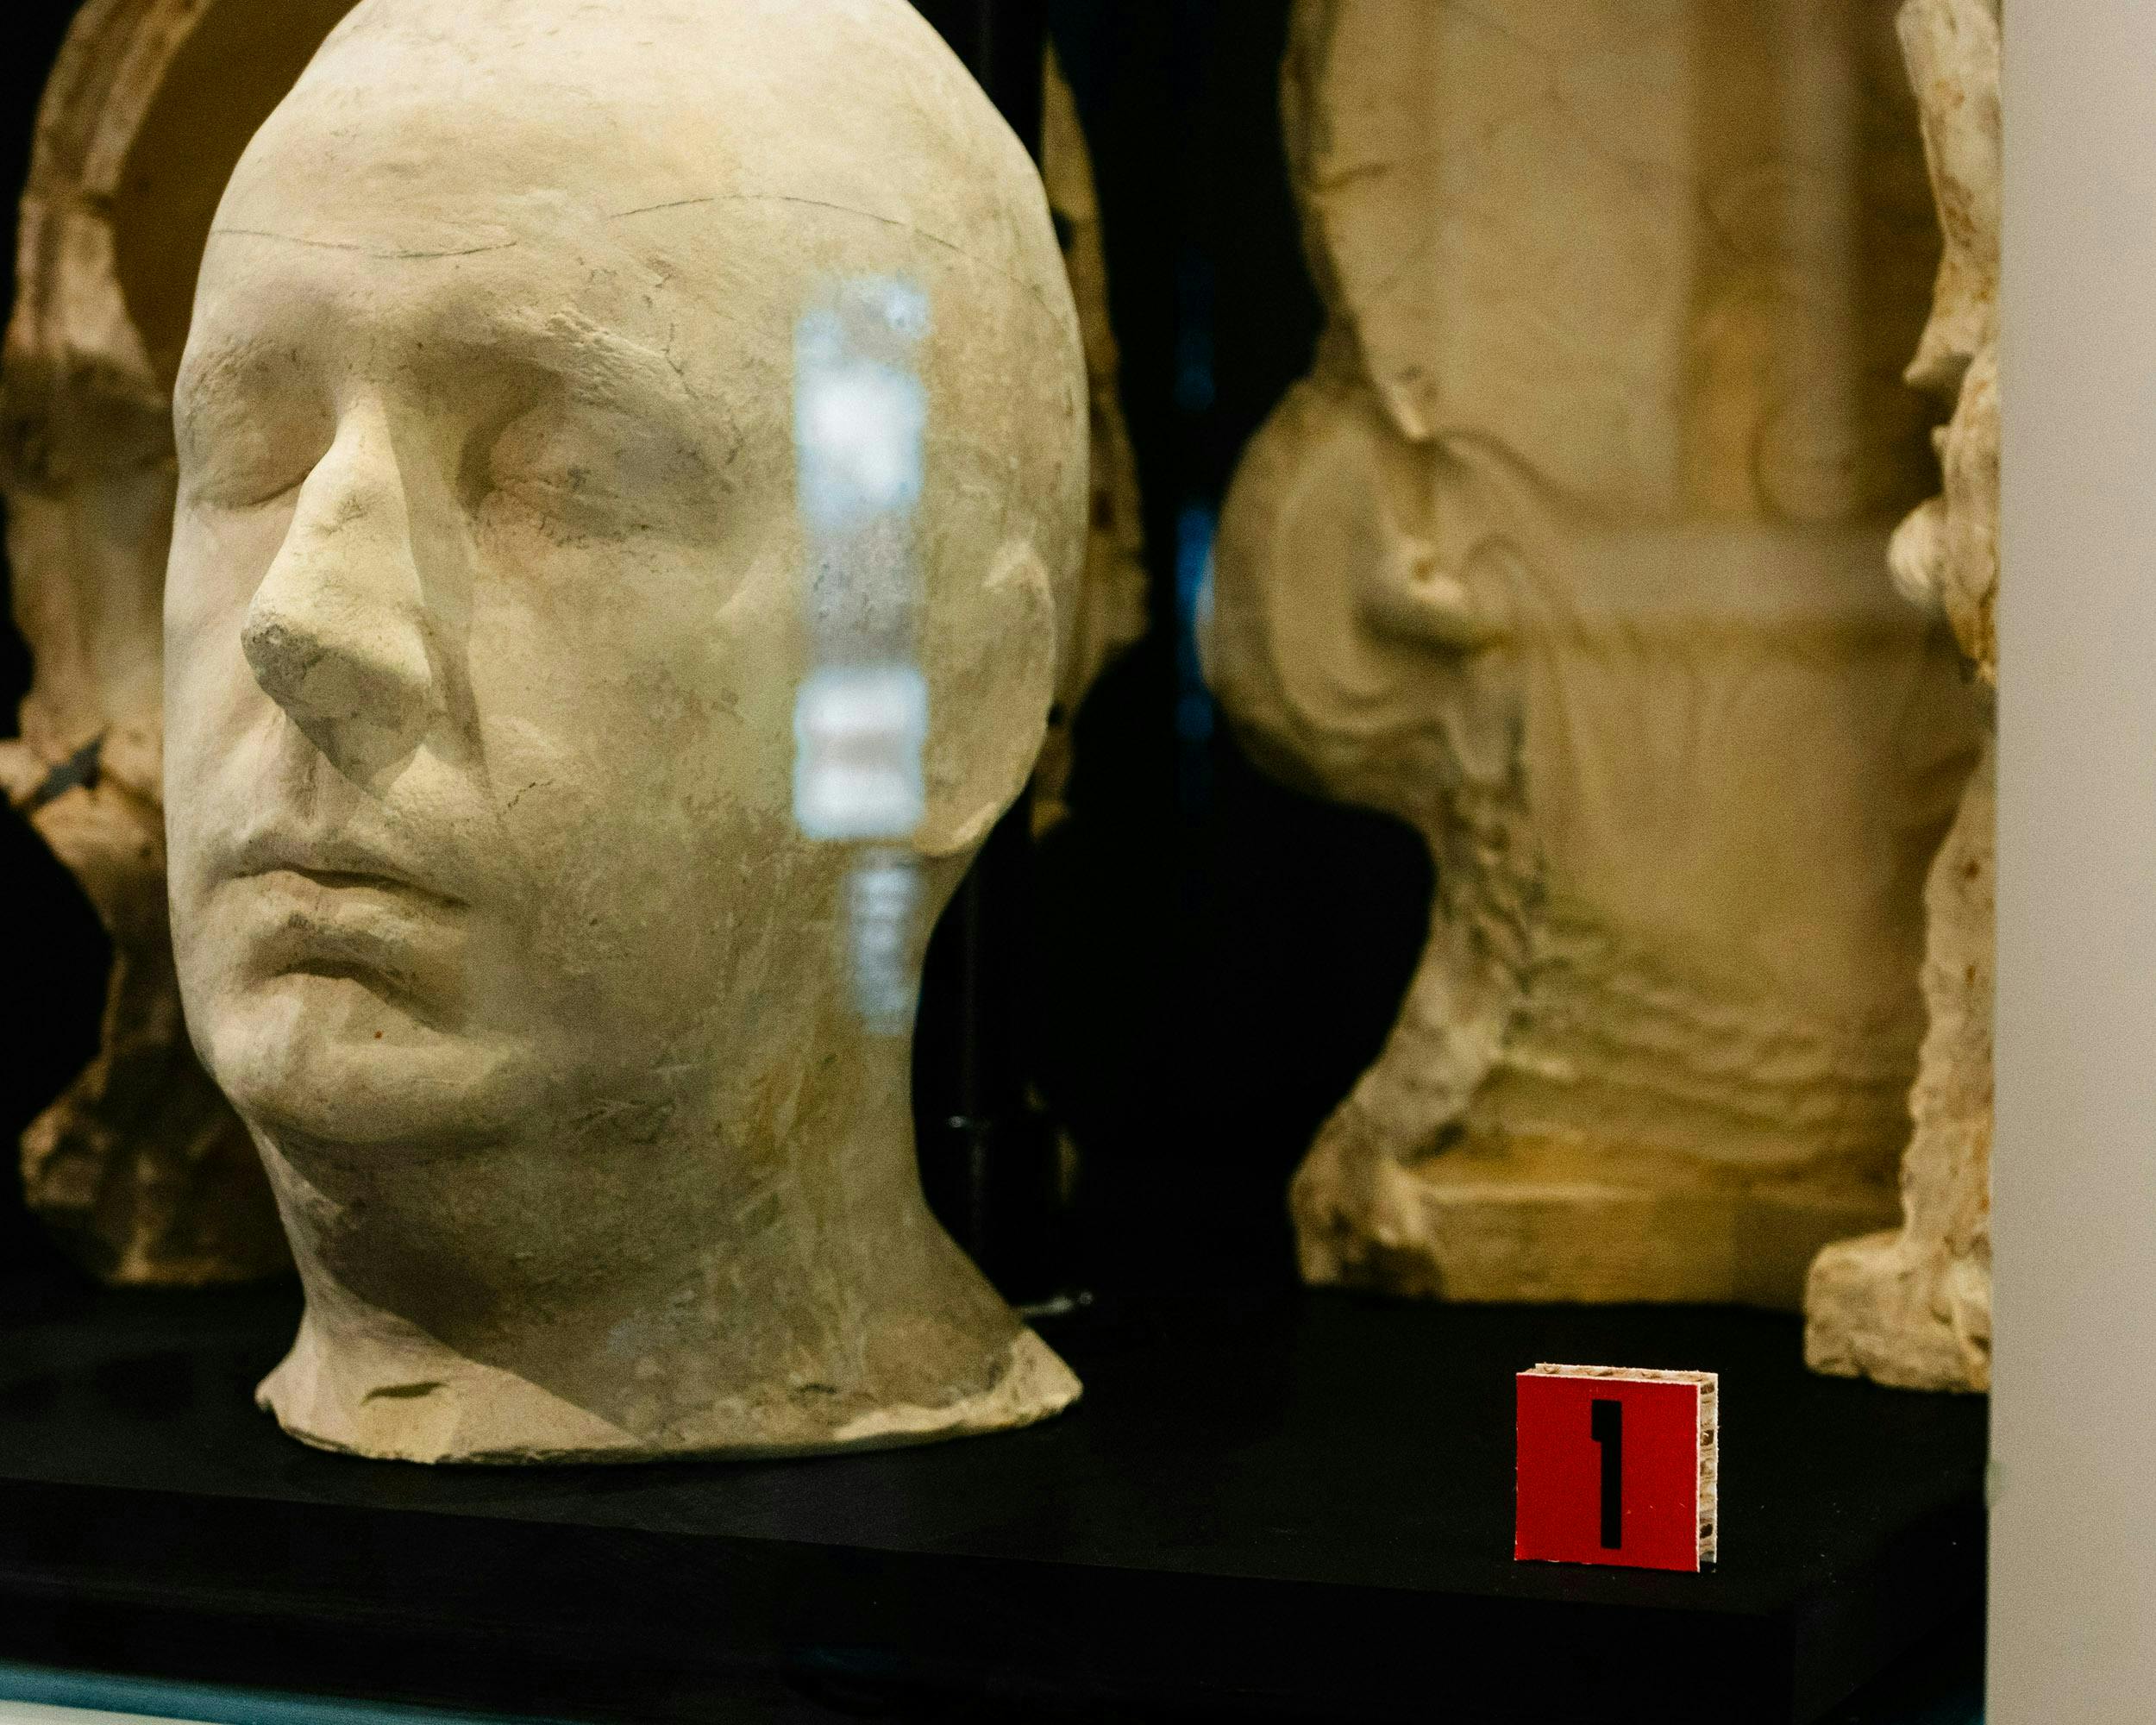 Plaster cast of a male head behind glass, labeled number 1 on a red square